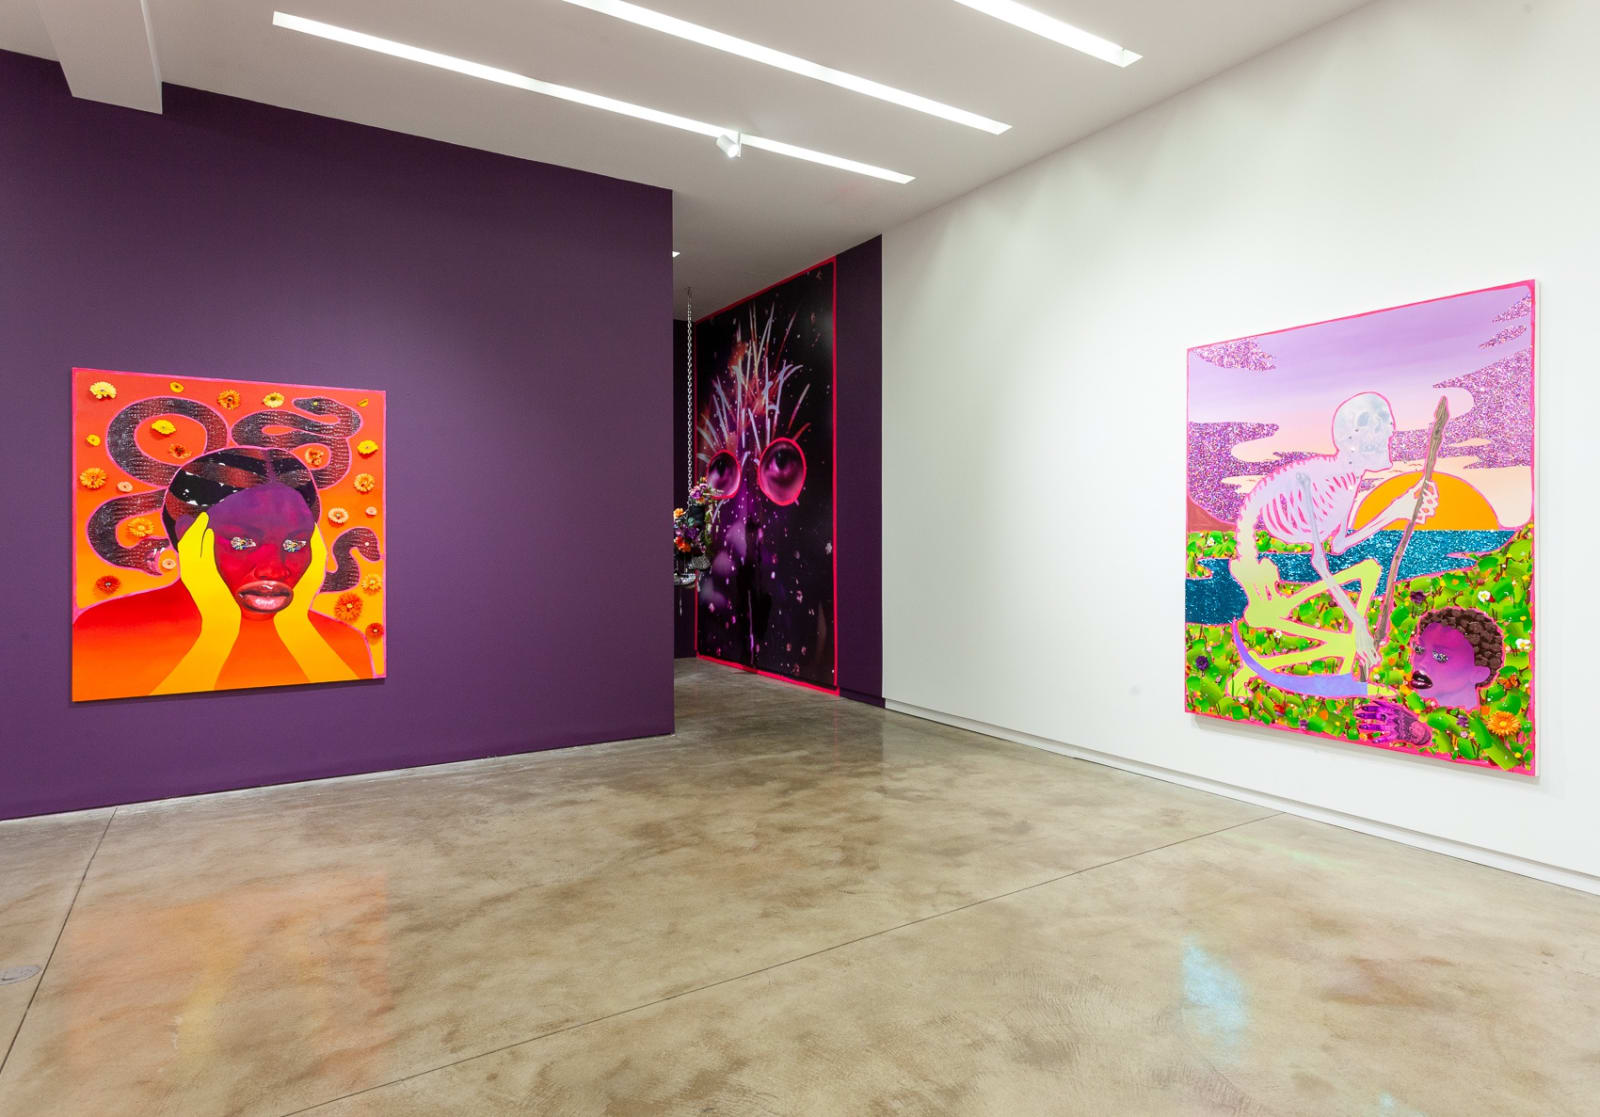 Devan Shimoyama: A Counterfeit Gift Wrapped in Fire